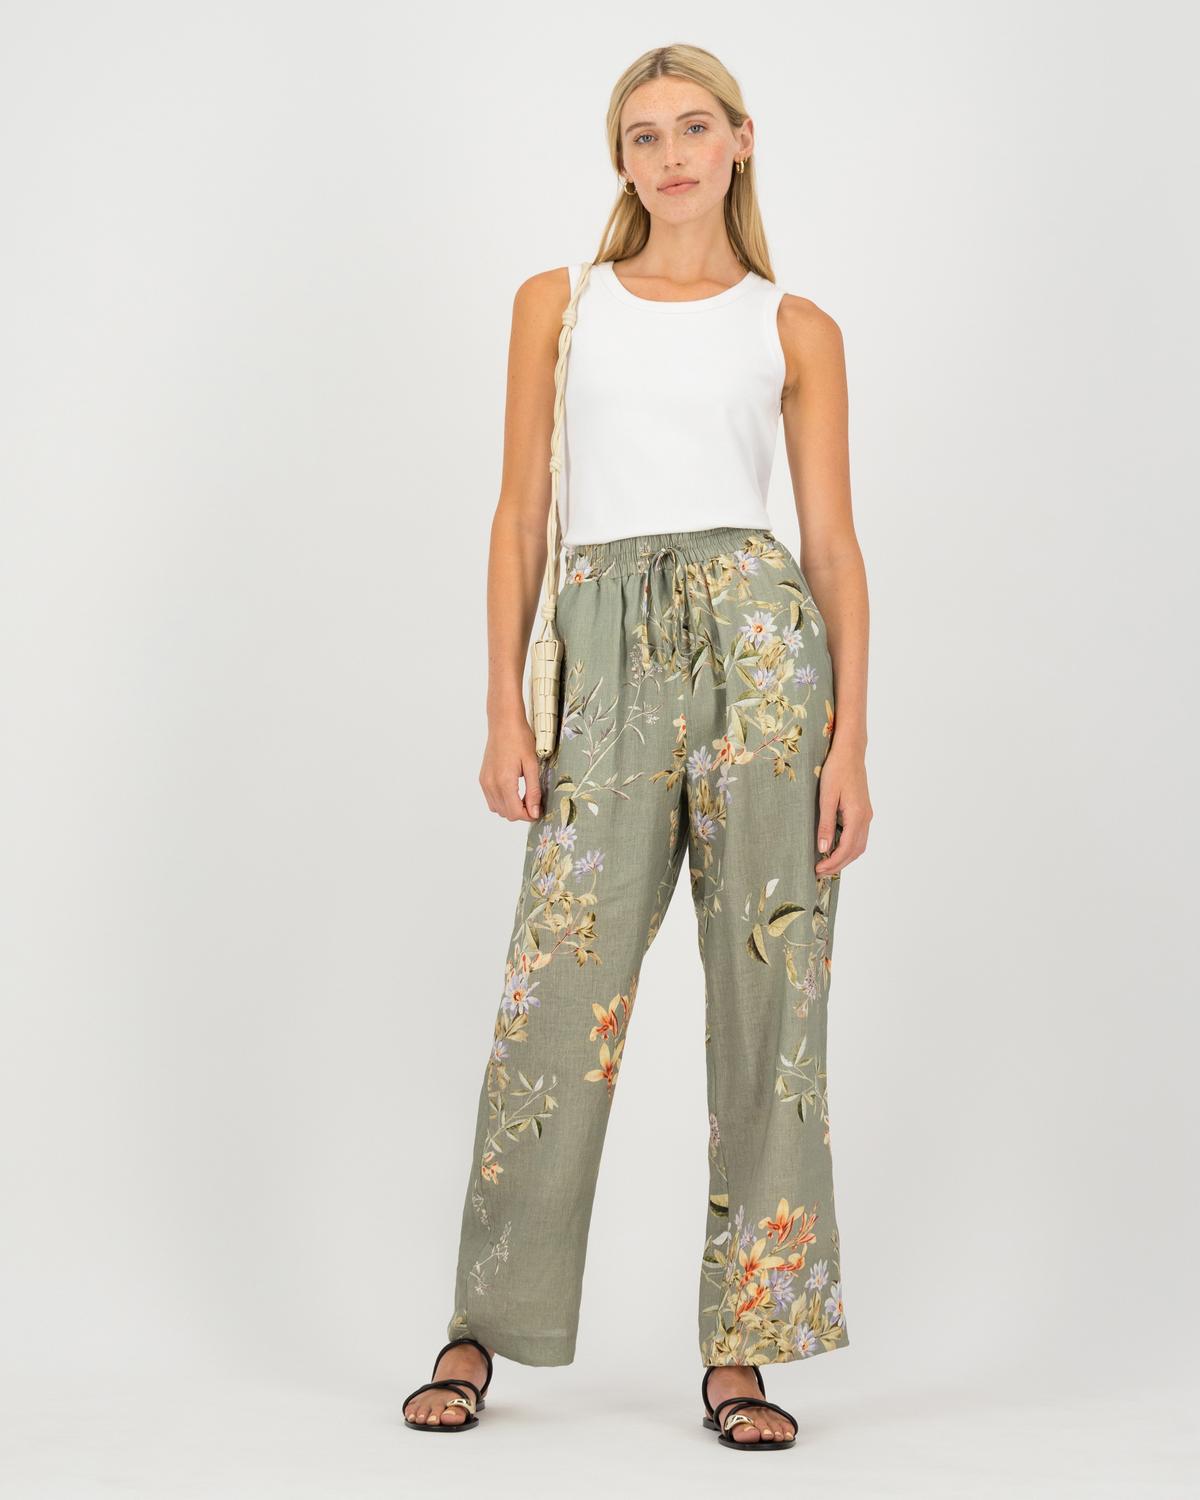 Poetry Ana Greens Linen printed pant -  green